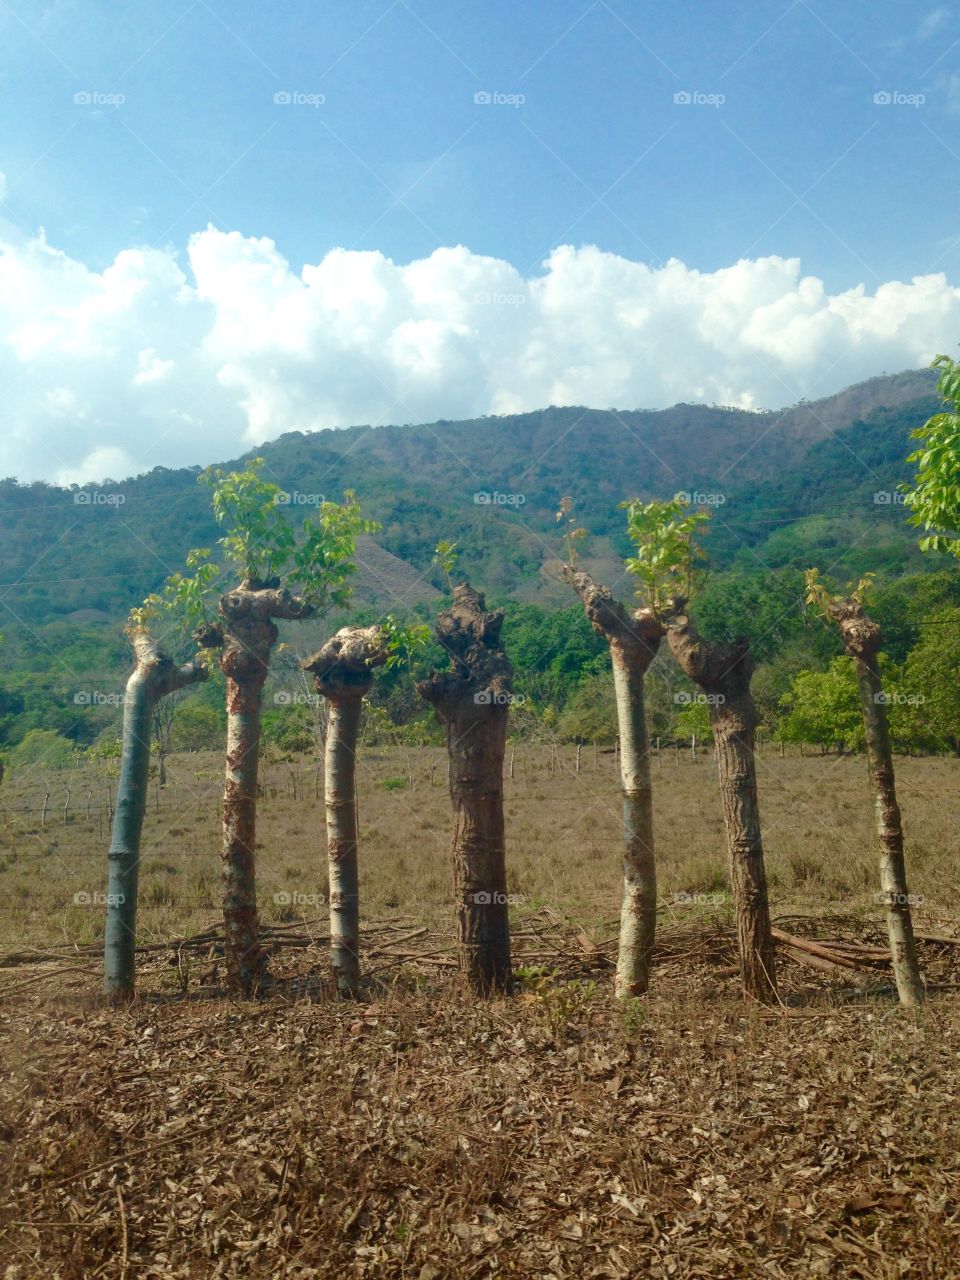 Costa Rica Mountains. They use live trees for their fences